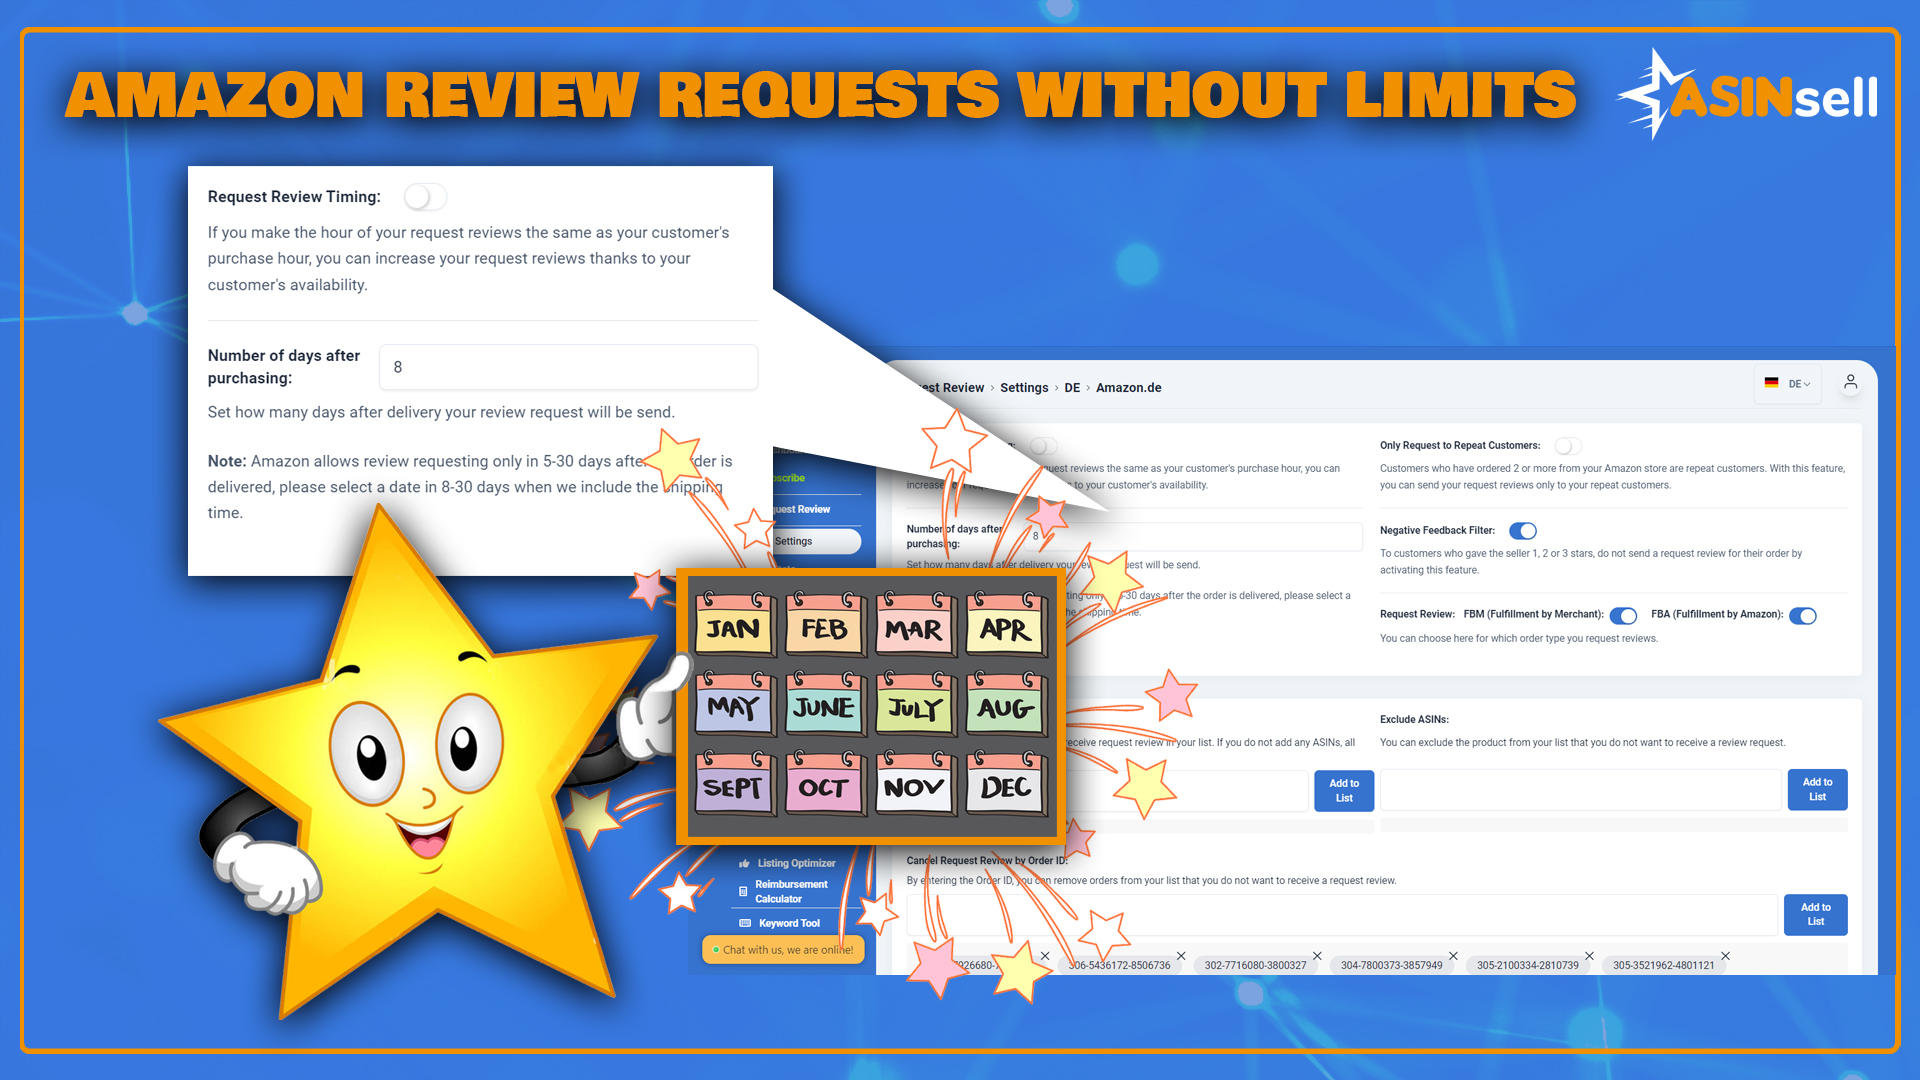 UNLIMITED REVIEW REQUESTS